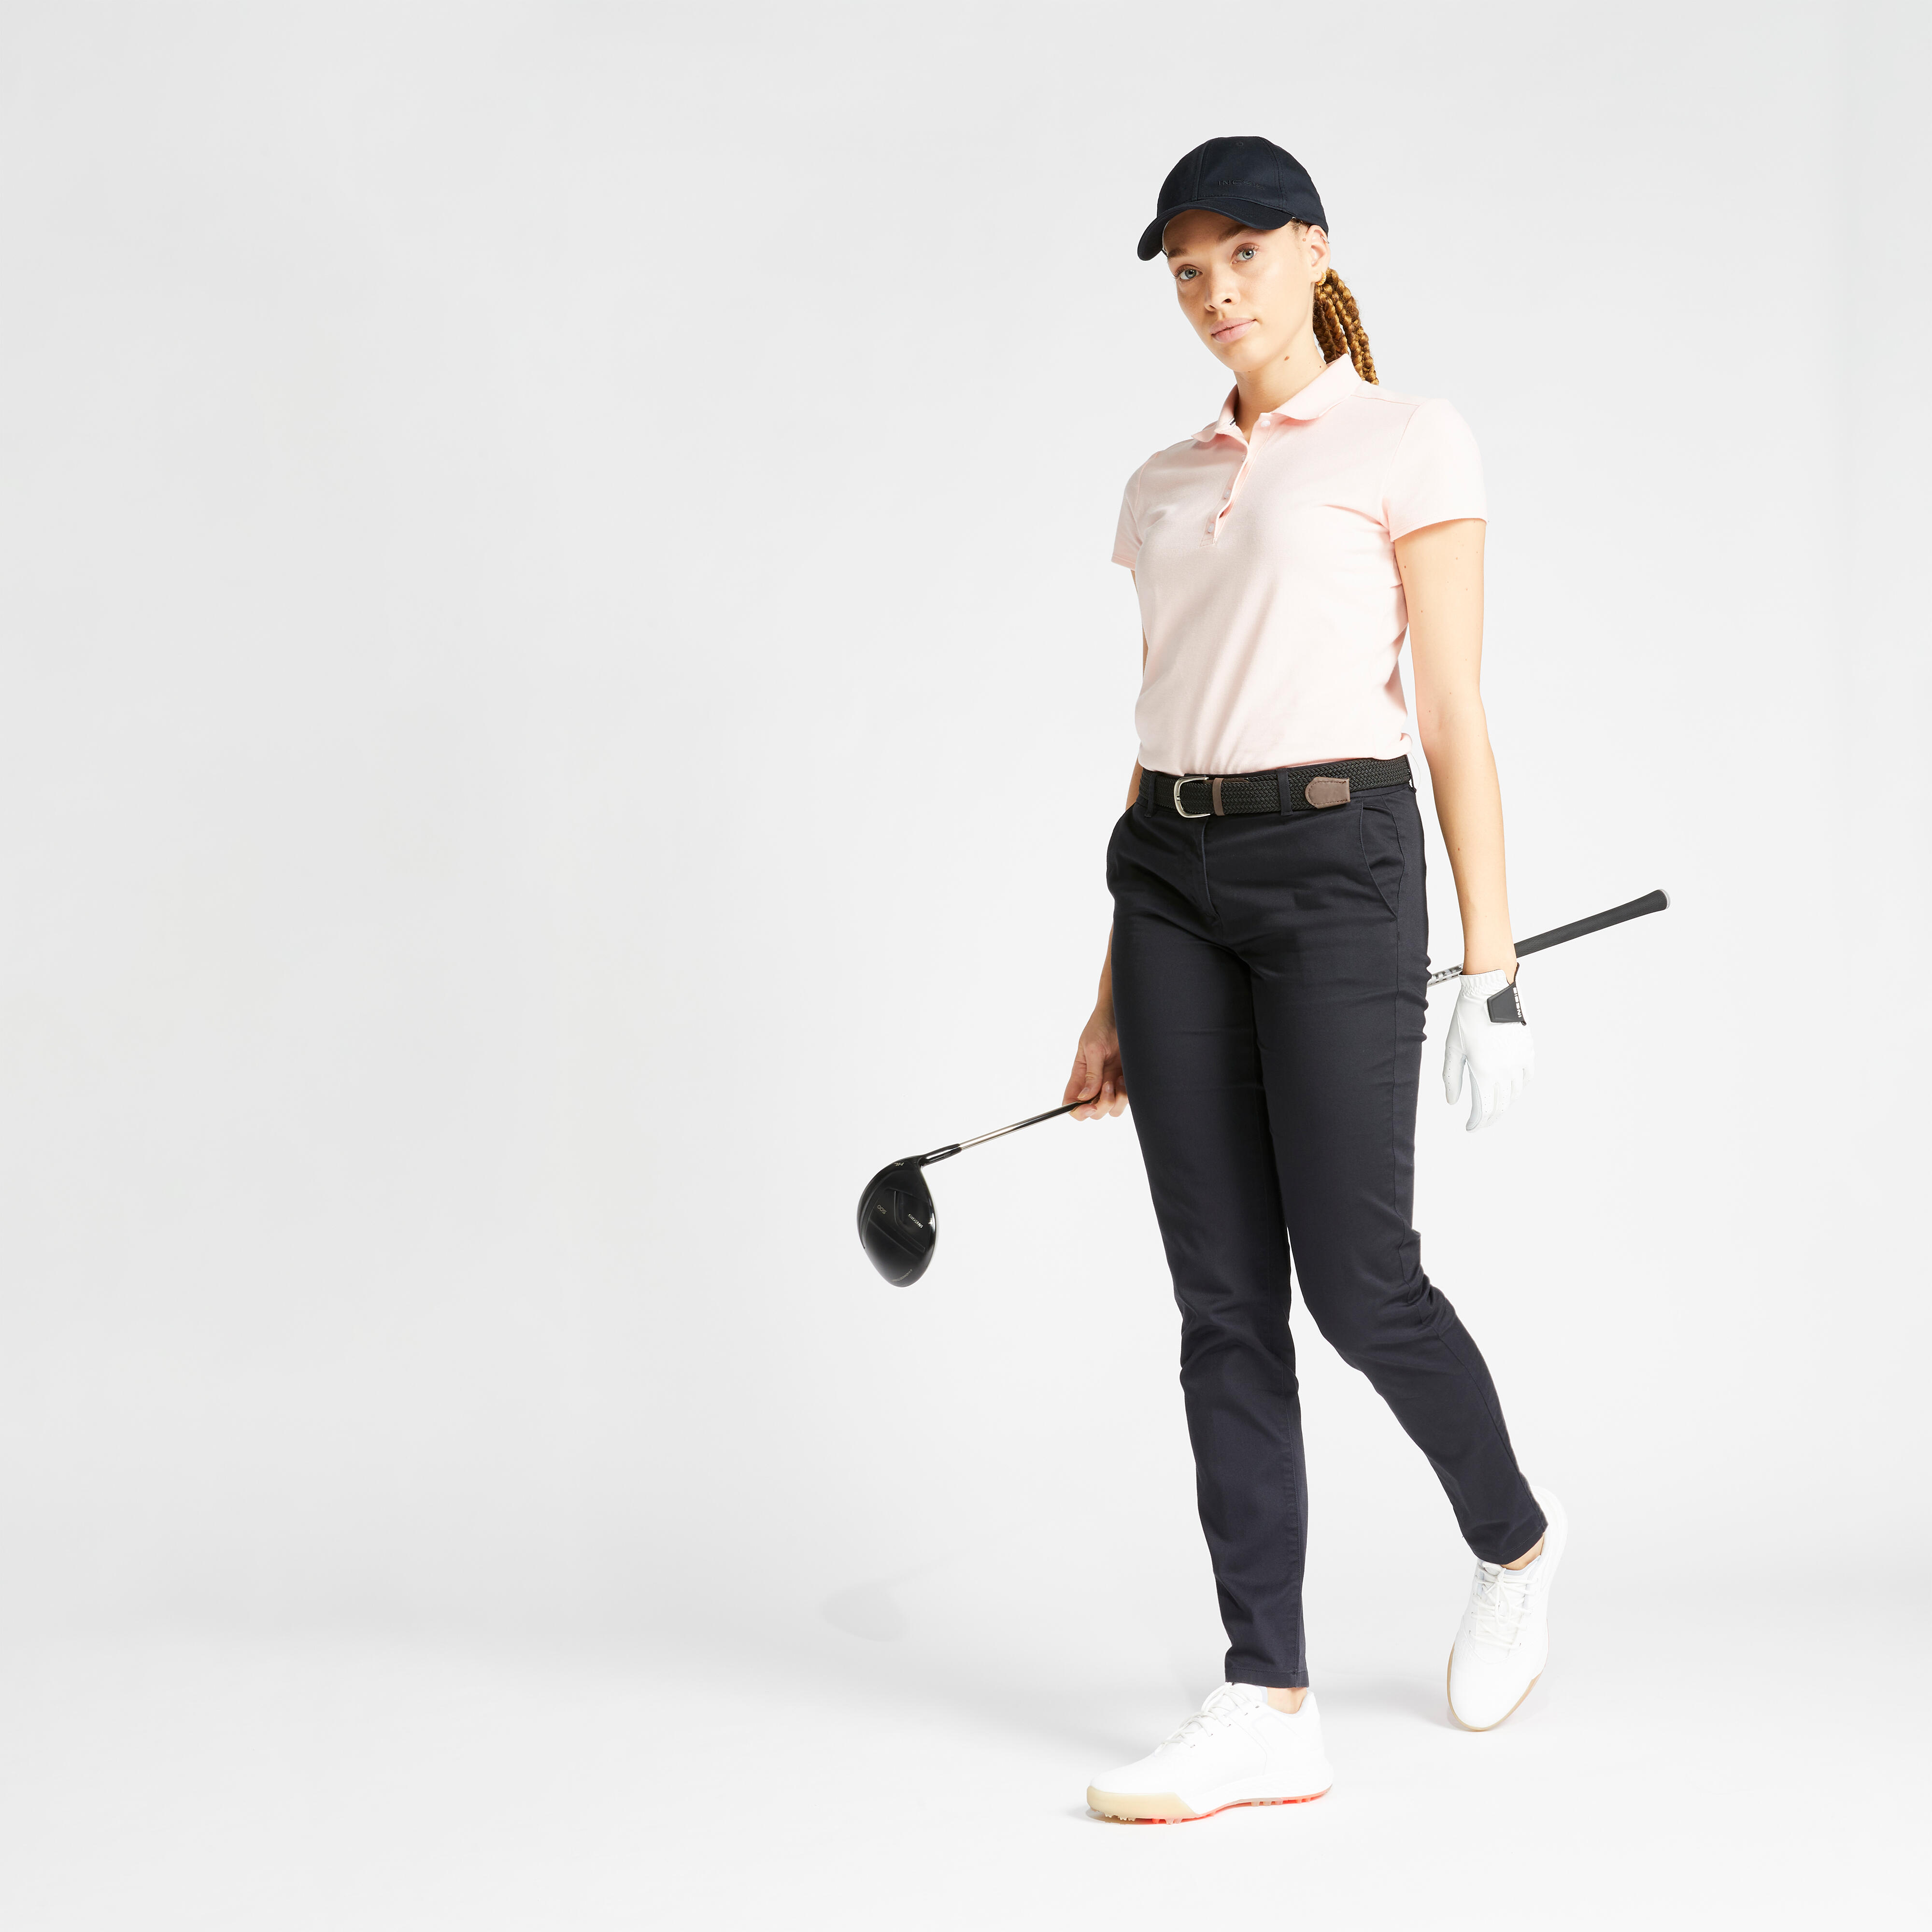 Ladies Golf Clothing Ping Golf Clothes for Women  Ping Europe